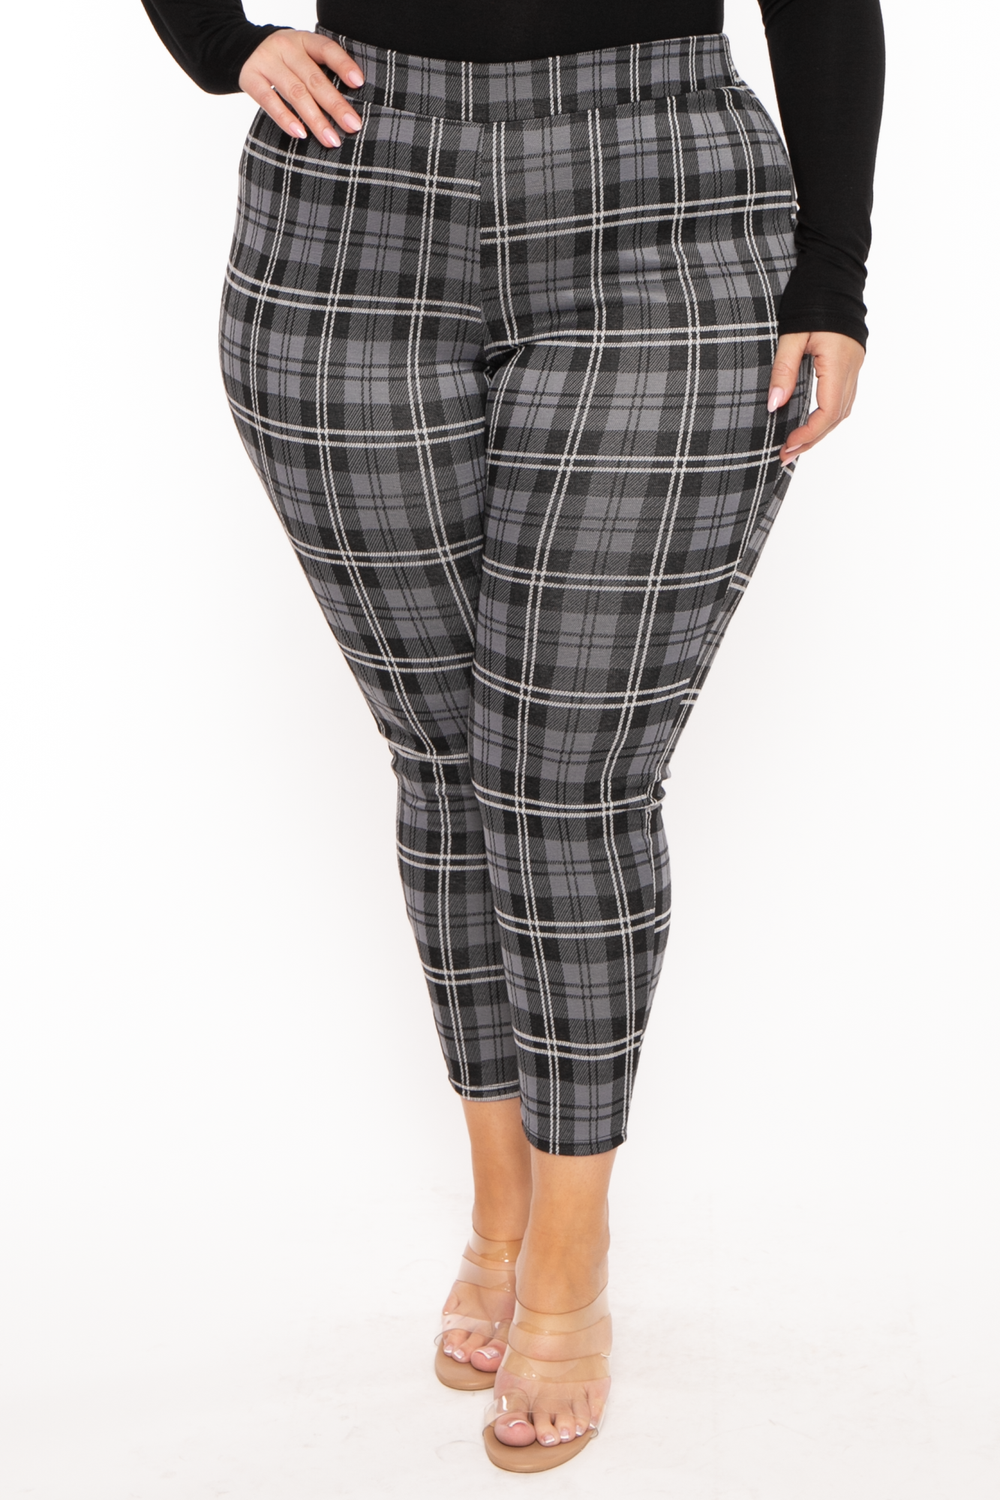 SHAUN Women Free Size Plus Size(Waist Size 36-46 inch) 3XL to 7XL  Stretchable Multicolor Track Pant (Length 37-39 inch_Pack of 3_778WT3_GLW)  : : Clothing & Accessories